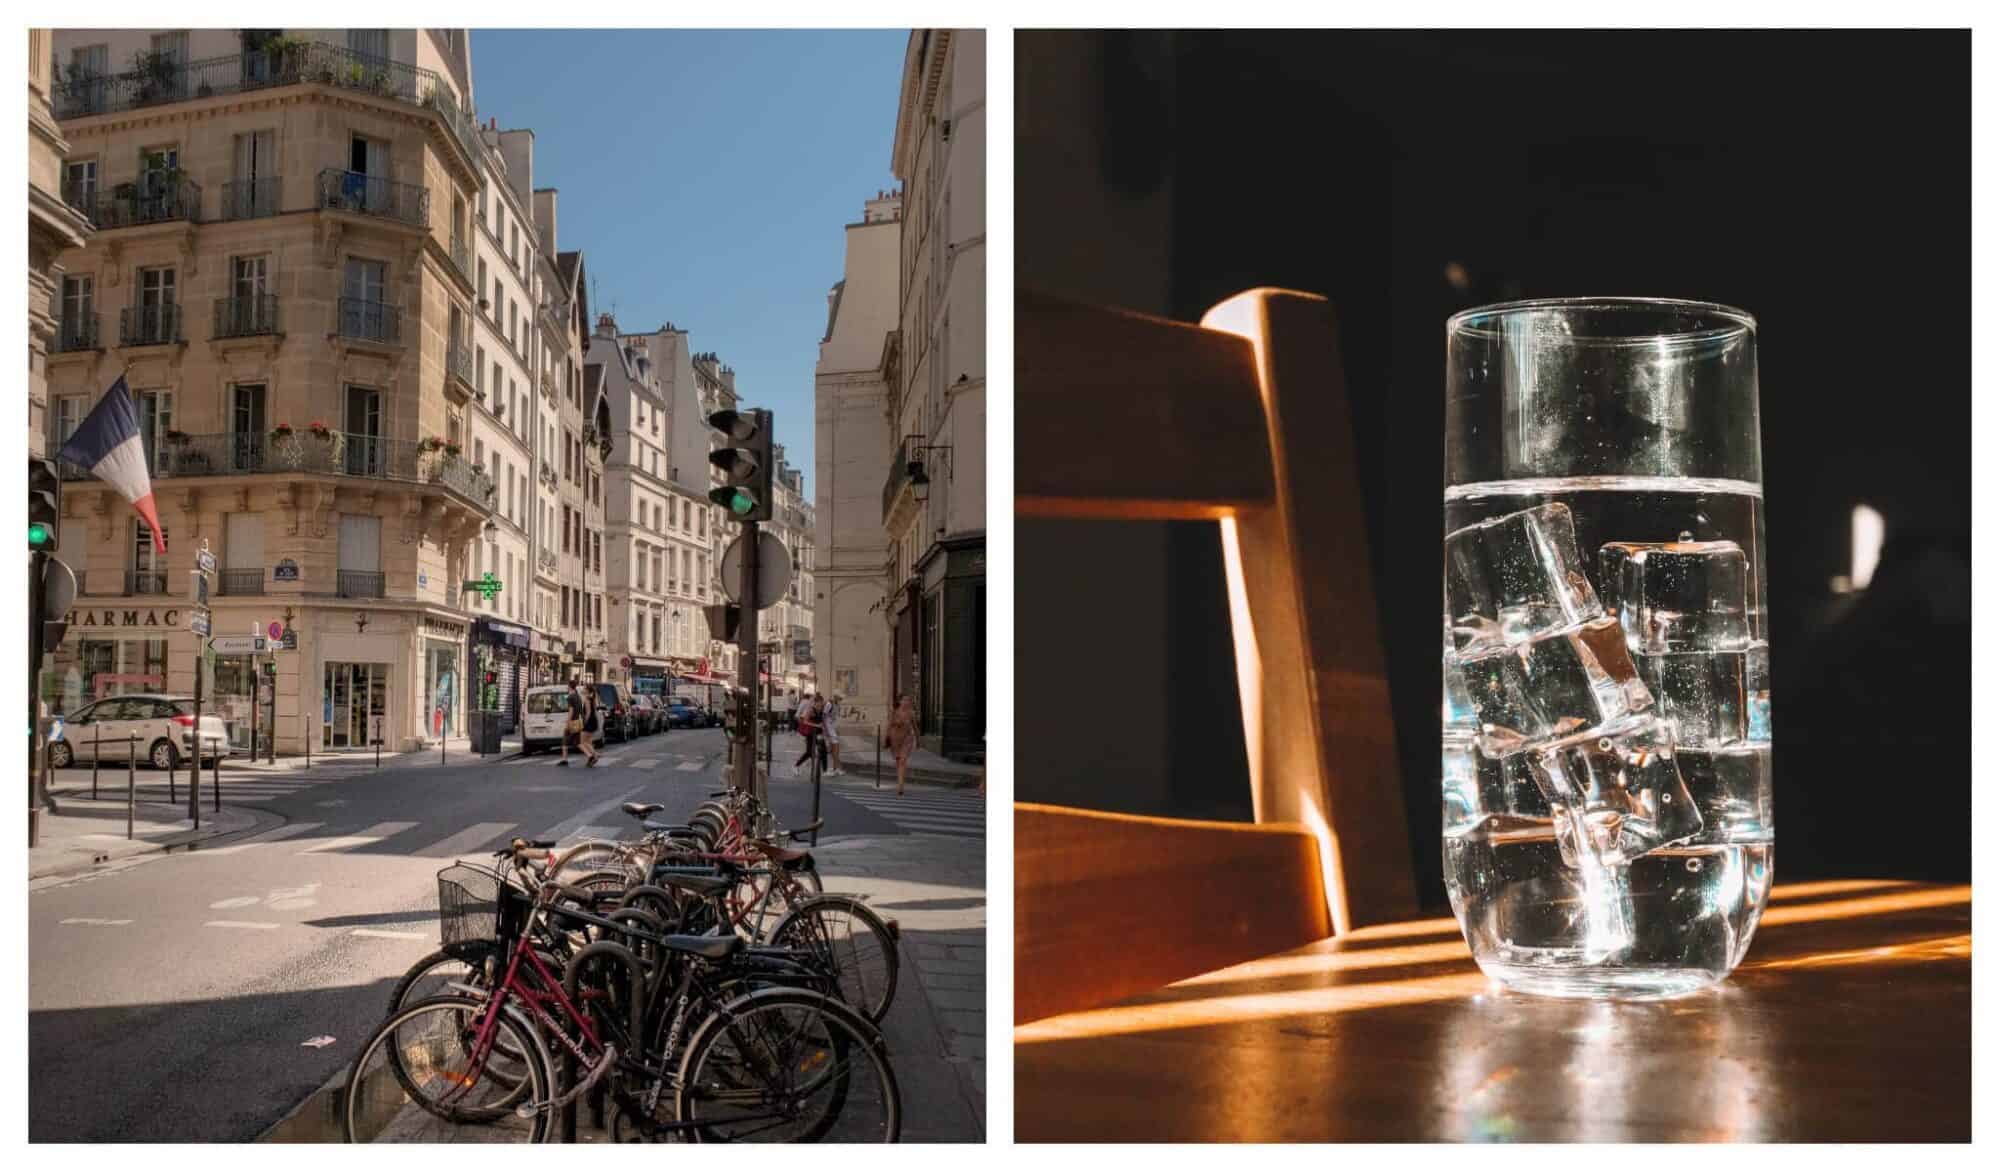 Left: Haussmann streets on a Parisian street; Right: a glass of ice water on a wooden table